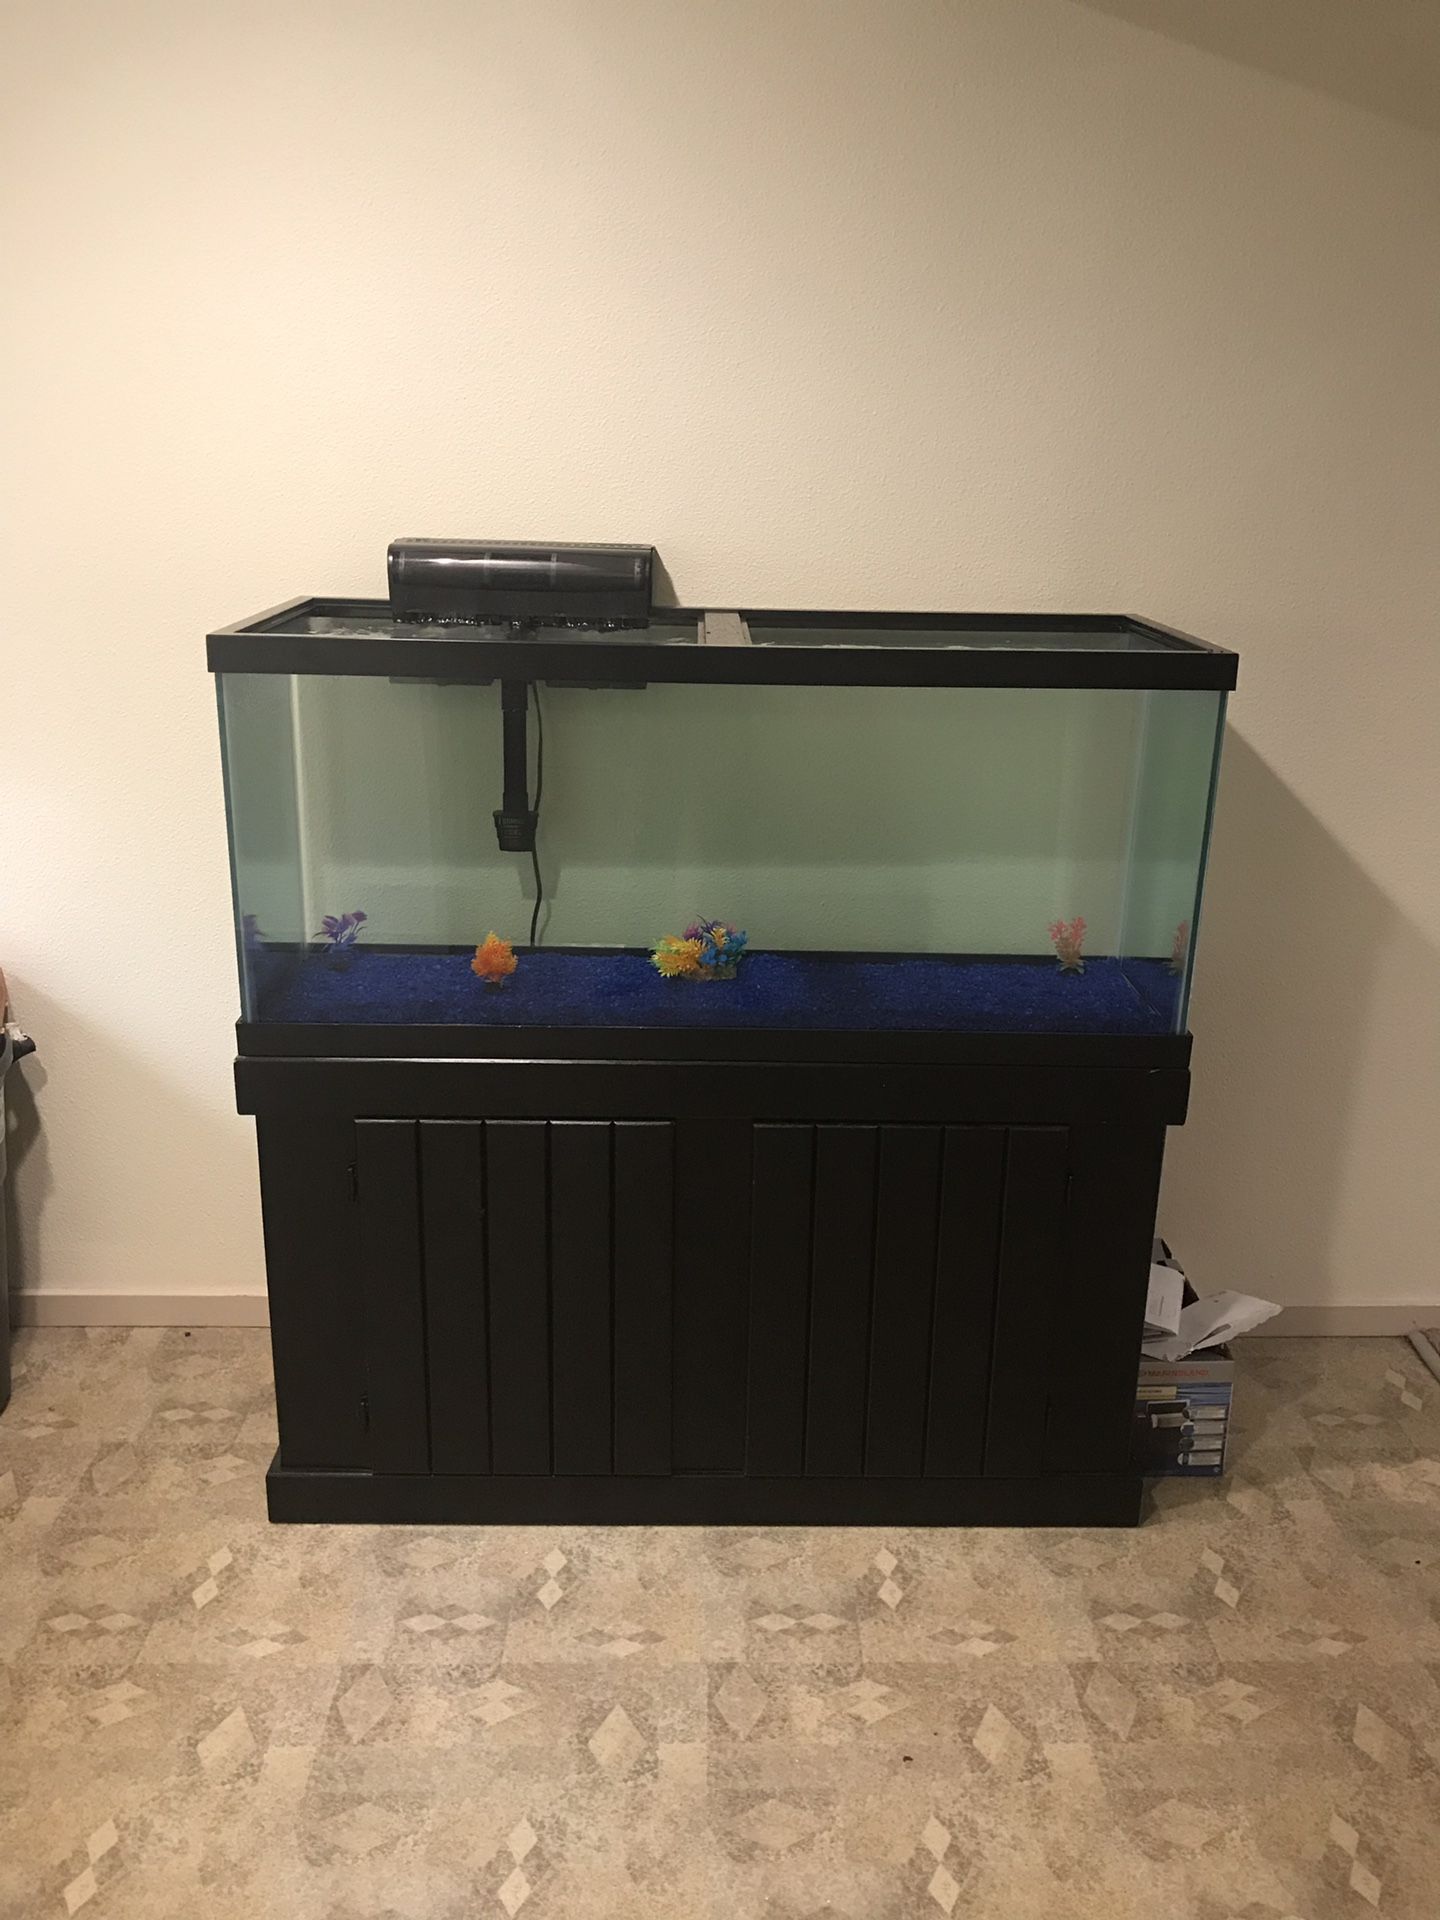 Brand new 75 gallon Fish tank for sale $300 or best offer